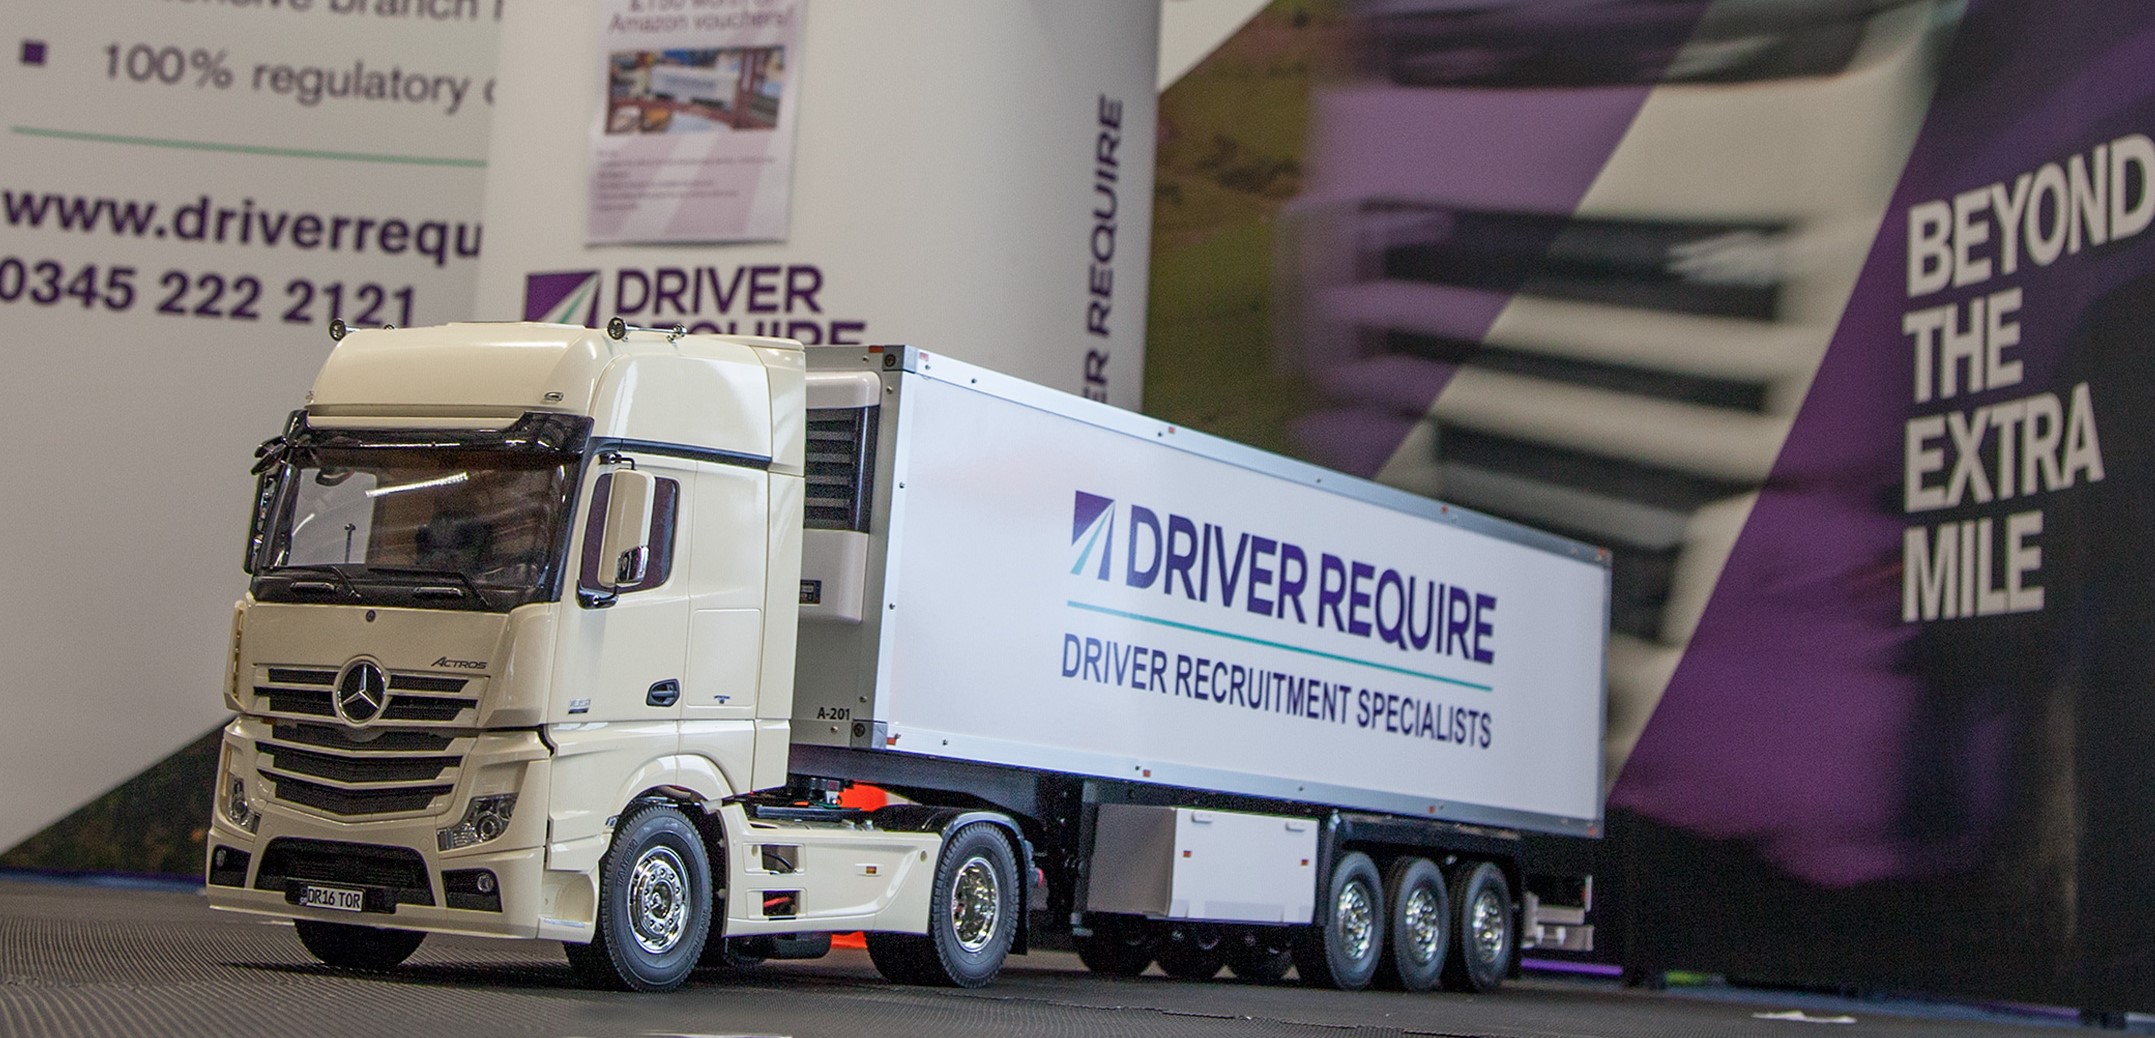 Driver require 20 years of excellence the leaders council